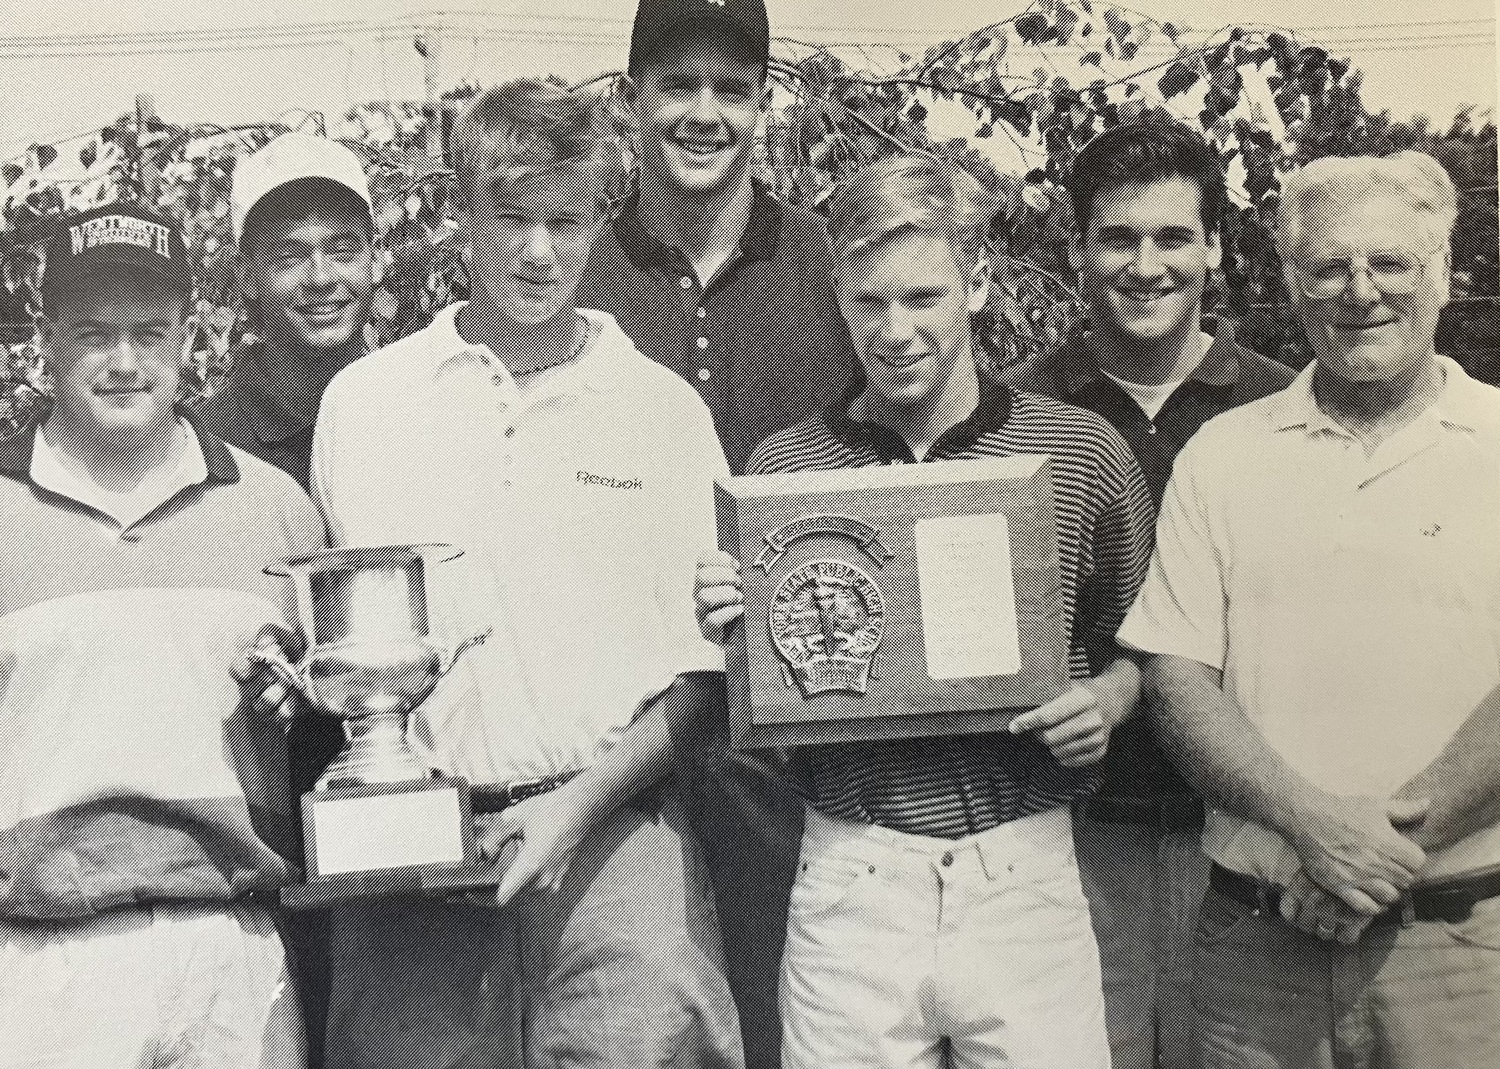 Marshall Garypie, far right, with the 1993 Southampton High School golf team, which was undefeated and won the Long Island championship. The Southampton teams Garypie coached dominated high school golf for nearly a decade.